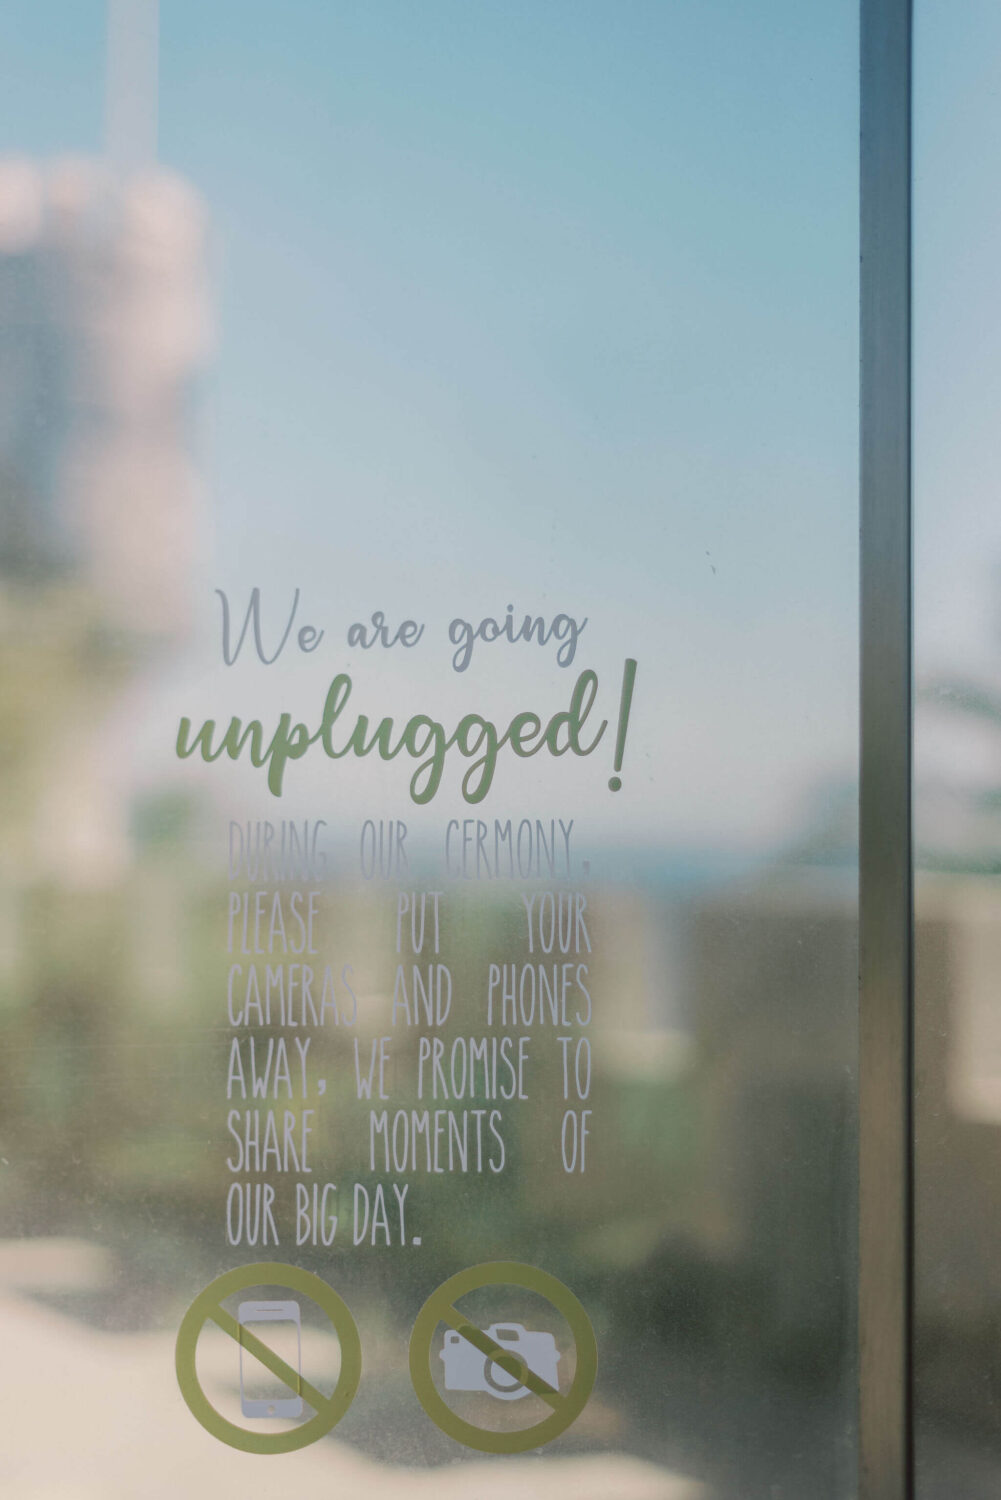 Glass door with a sign stating this is an unplugged wedding